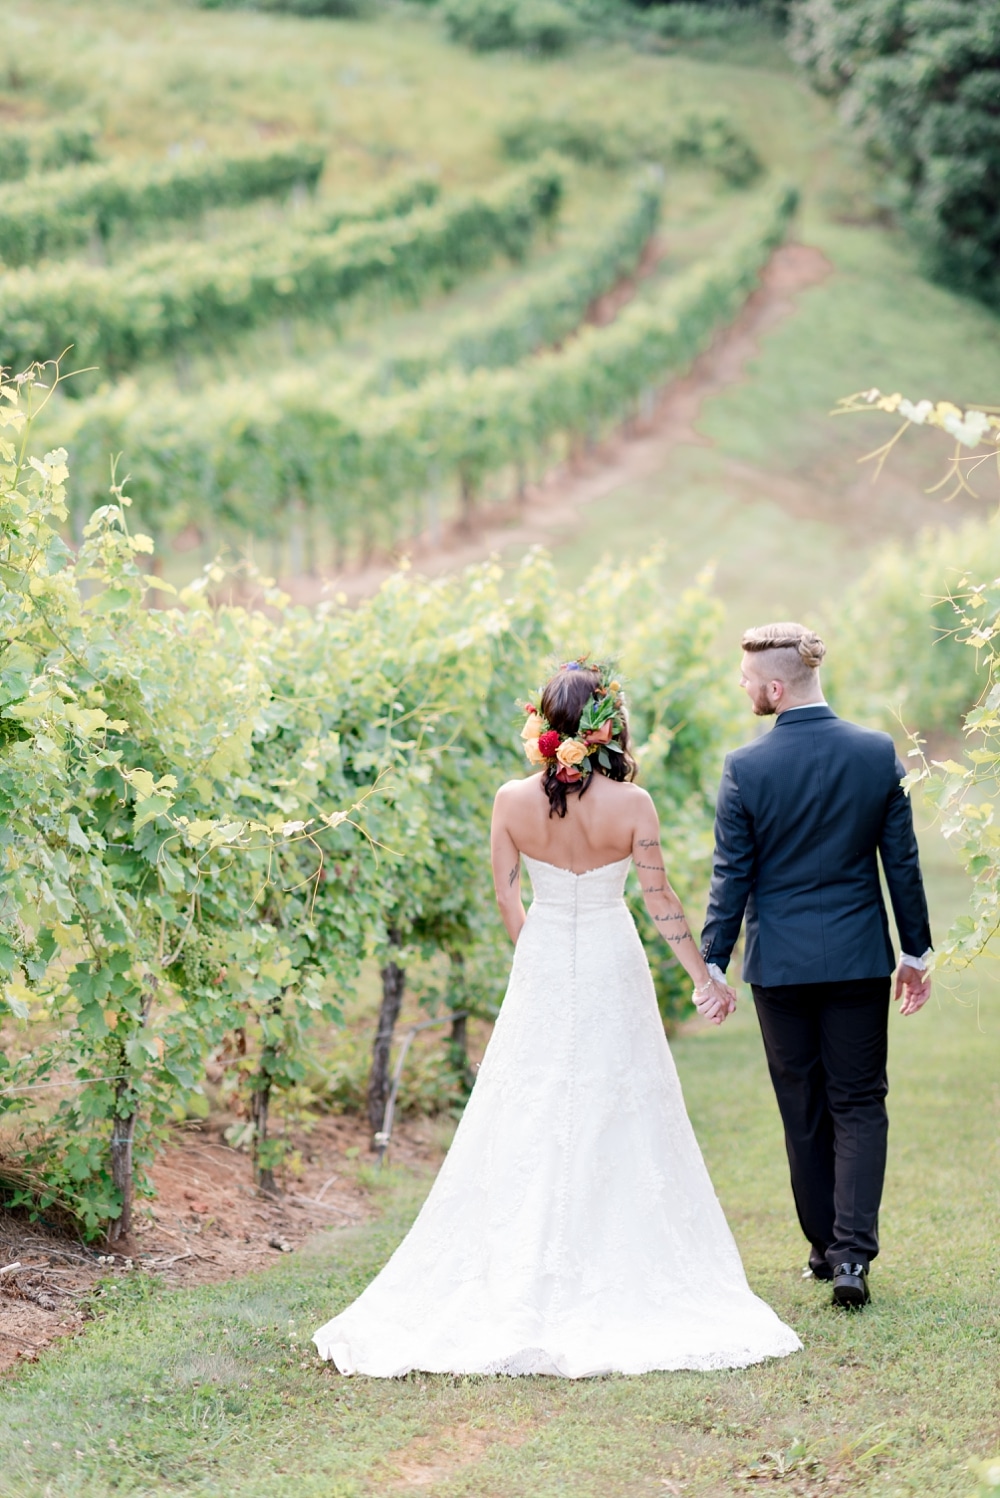 Bride and groom walking in vines at DelFosse Winery near Charlottesville